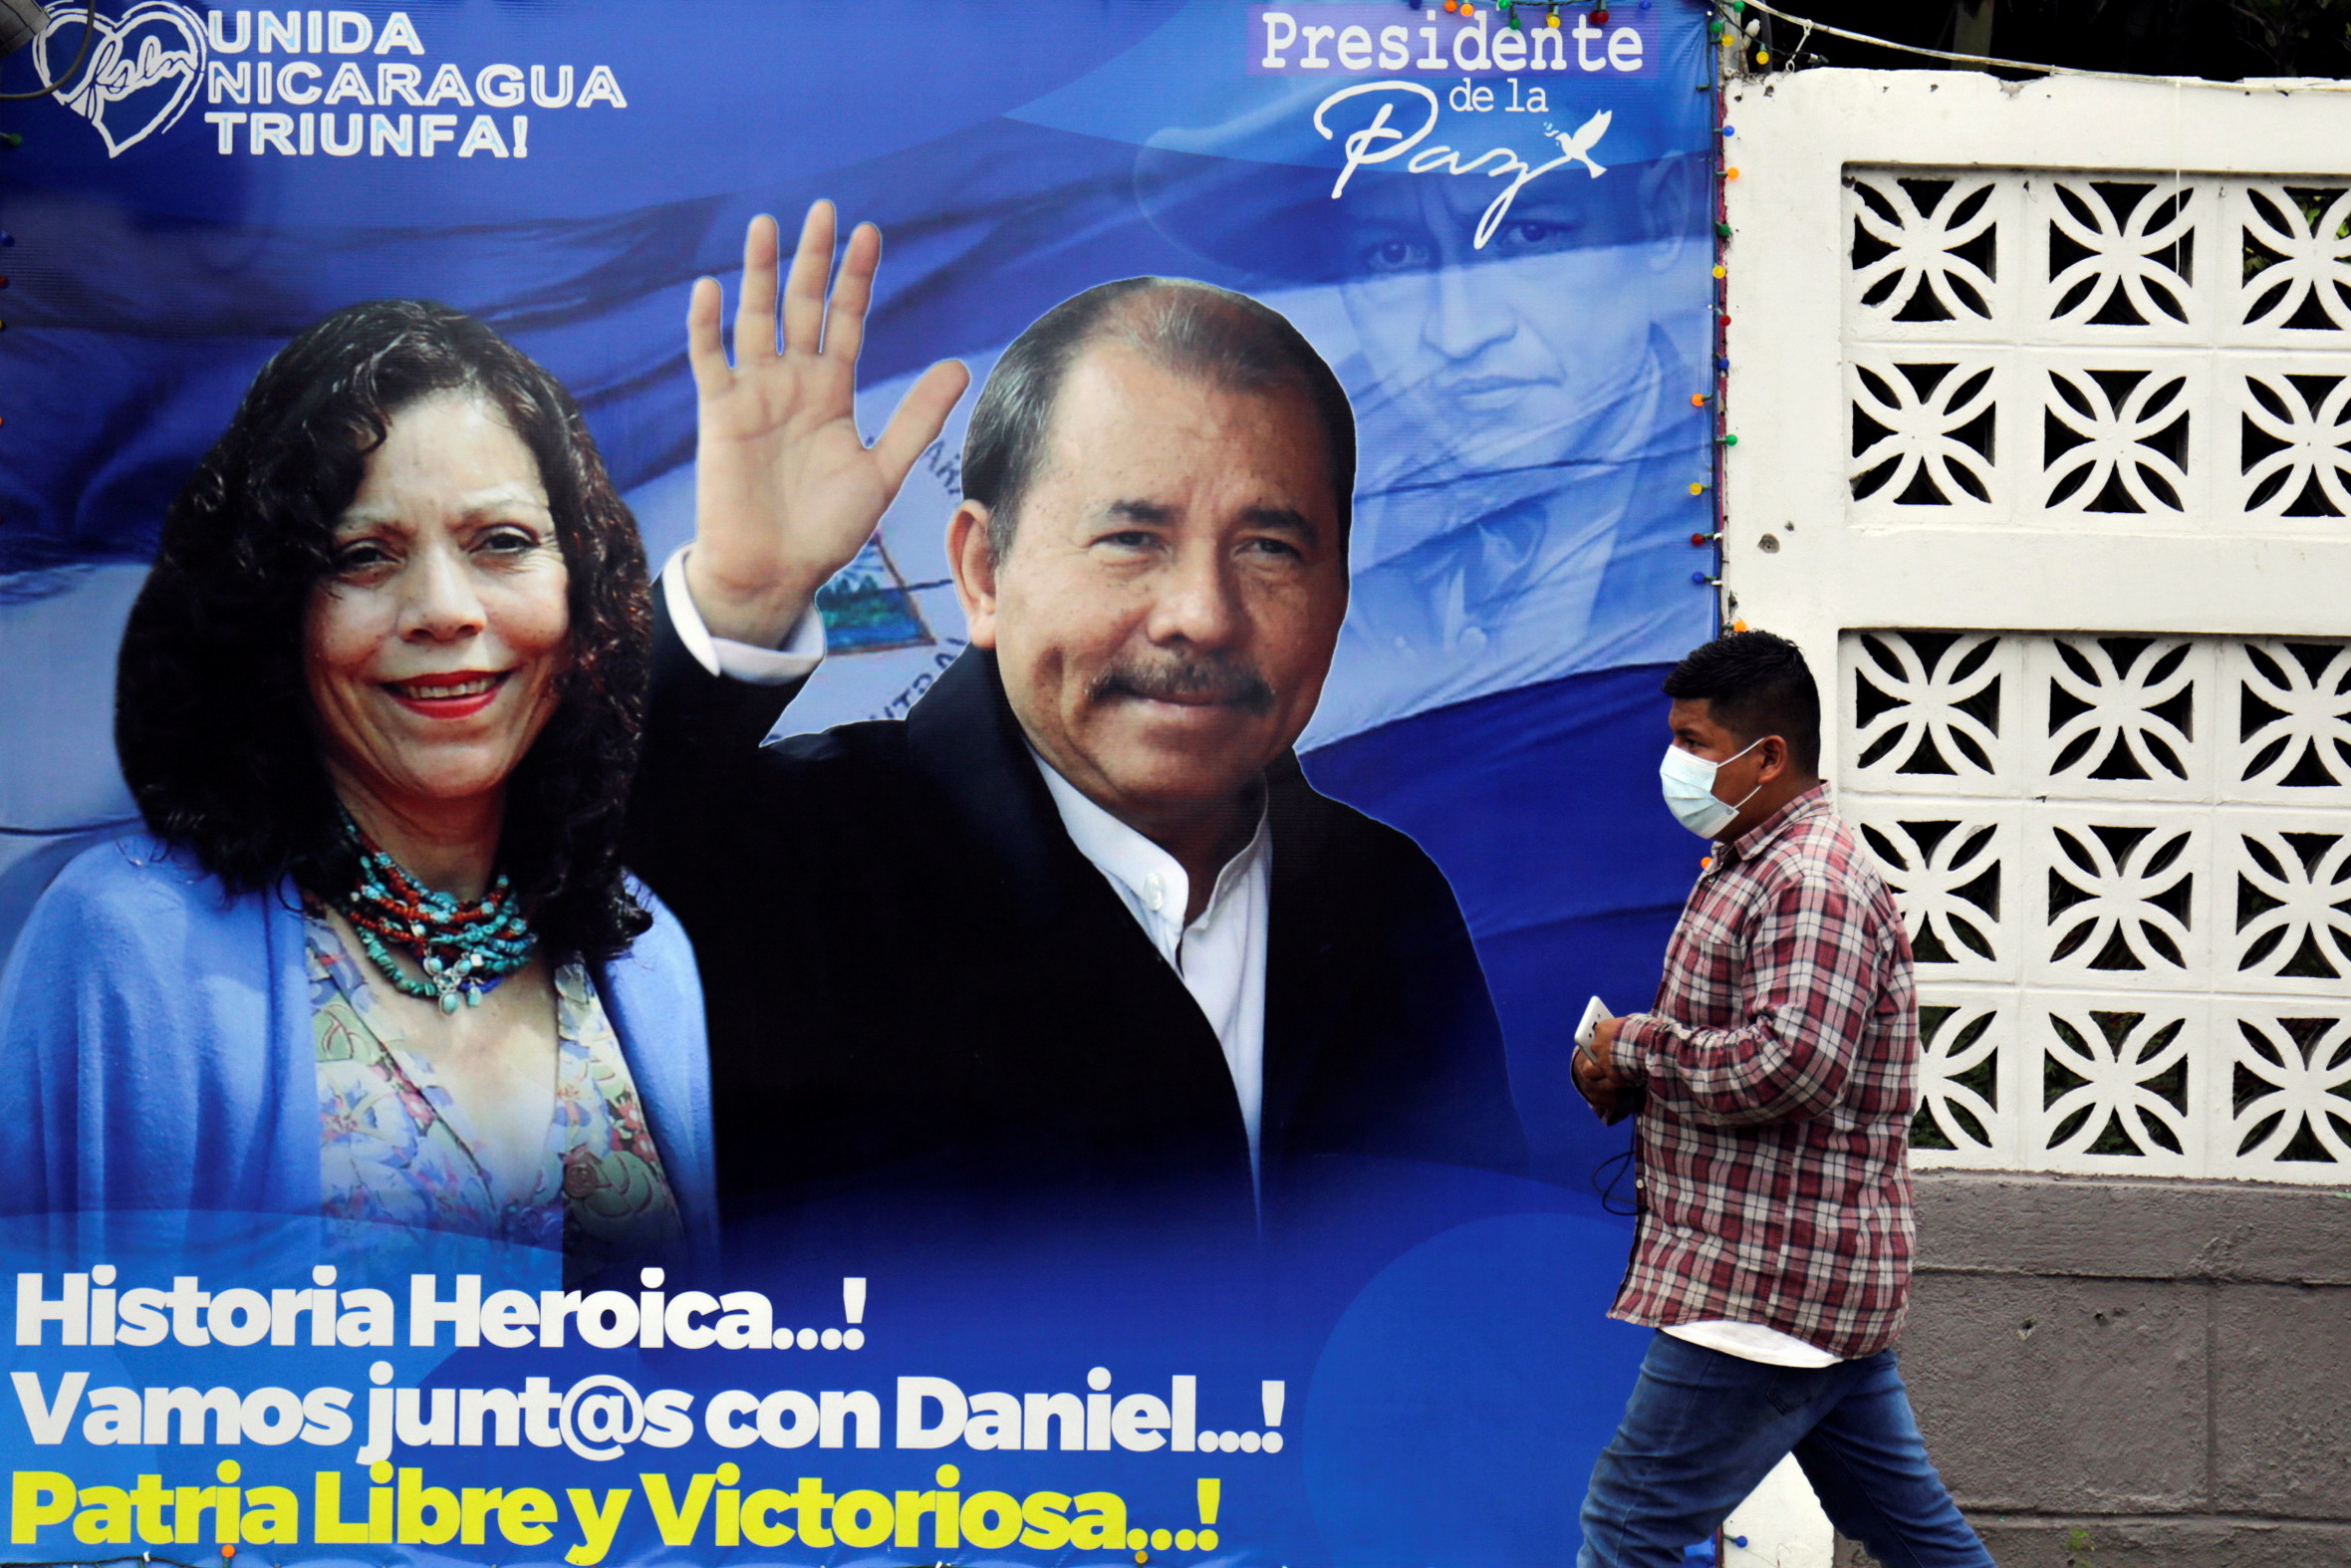 A man walks by a banner depicting Nicaragua's President Daniel Ortega and Vice President Rosario Murillo ahead of the country's presidential elections, in Managua, Nicaragua November 2, 2021. Picture taken November 2, 2021. REUTERS/Stringer NO RESALES. NO ARCHIVES